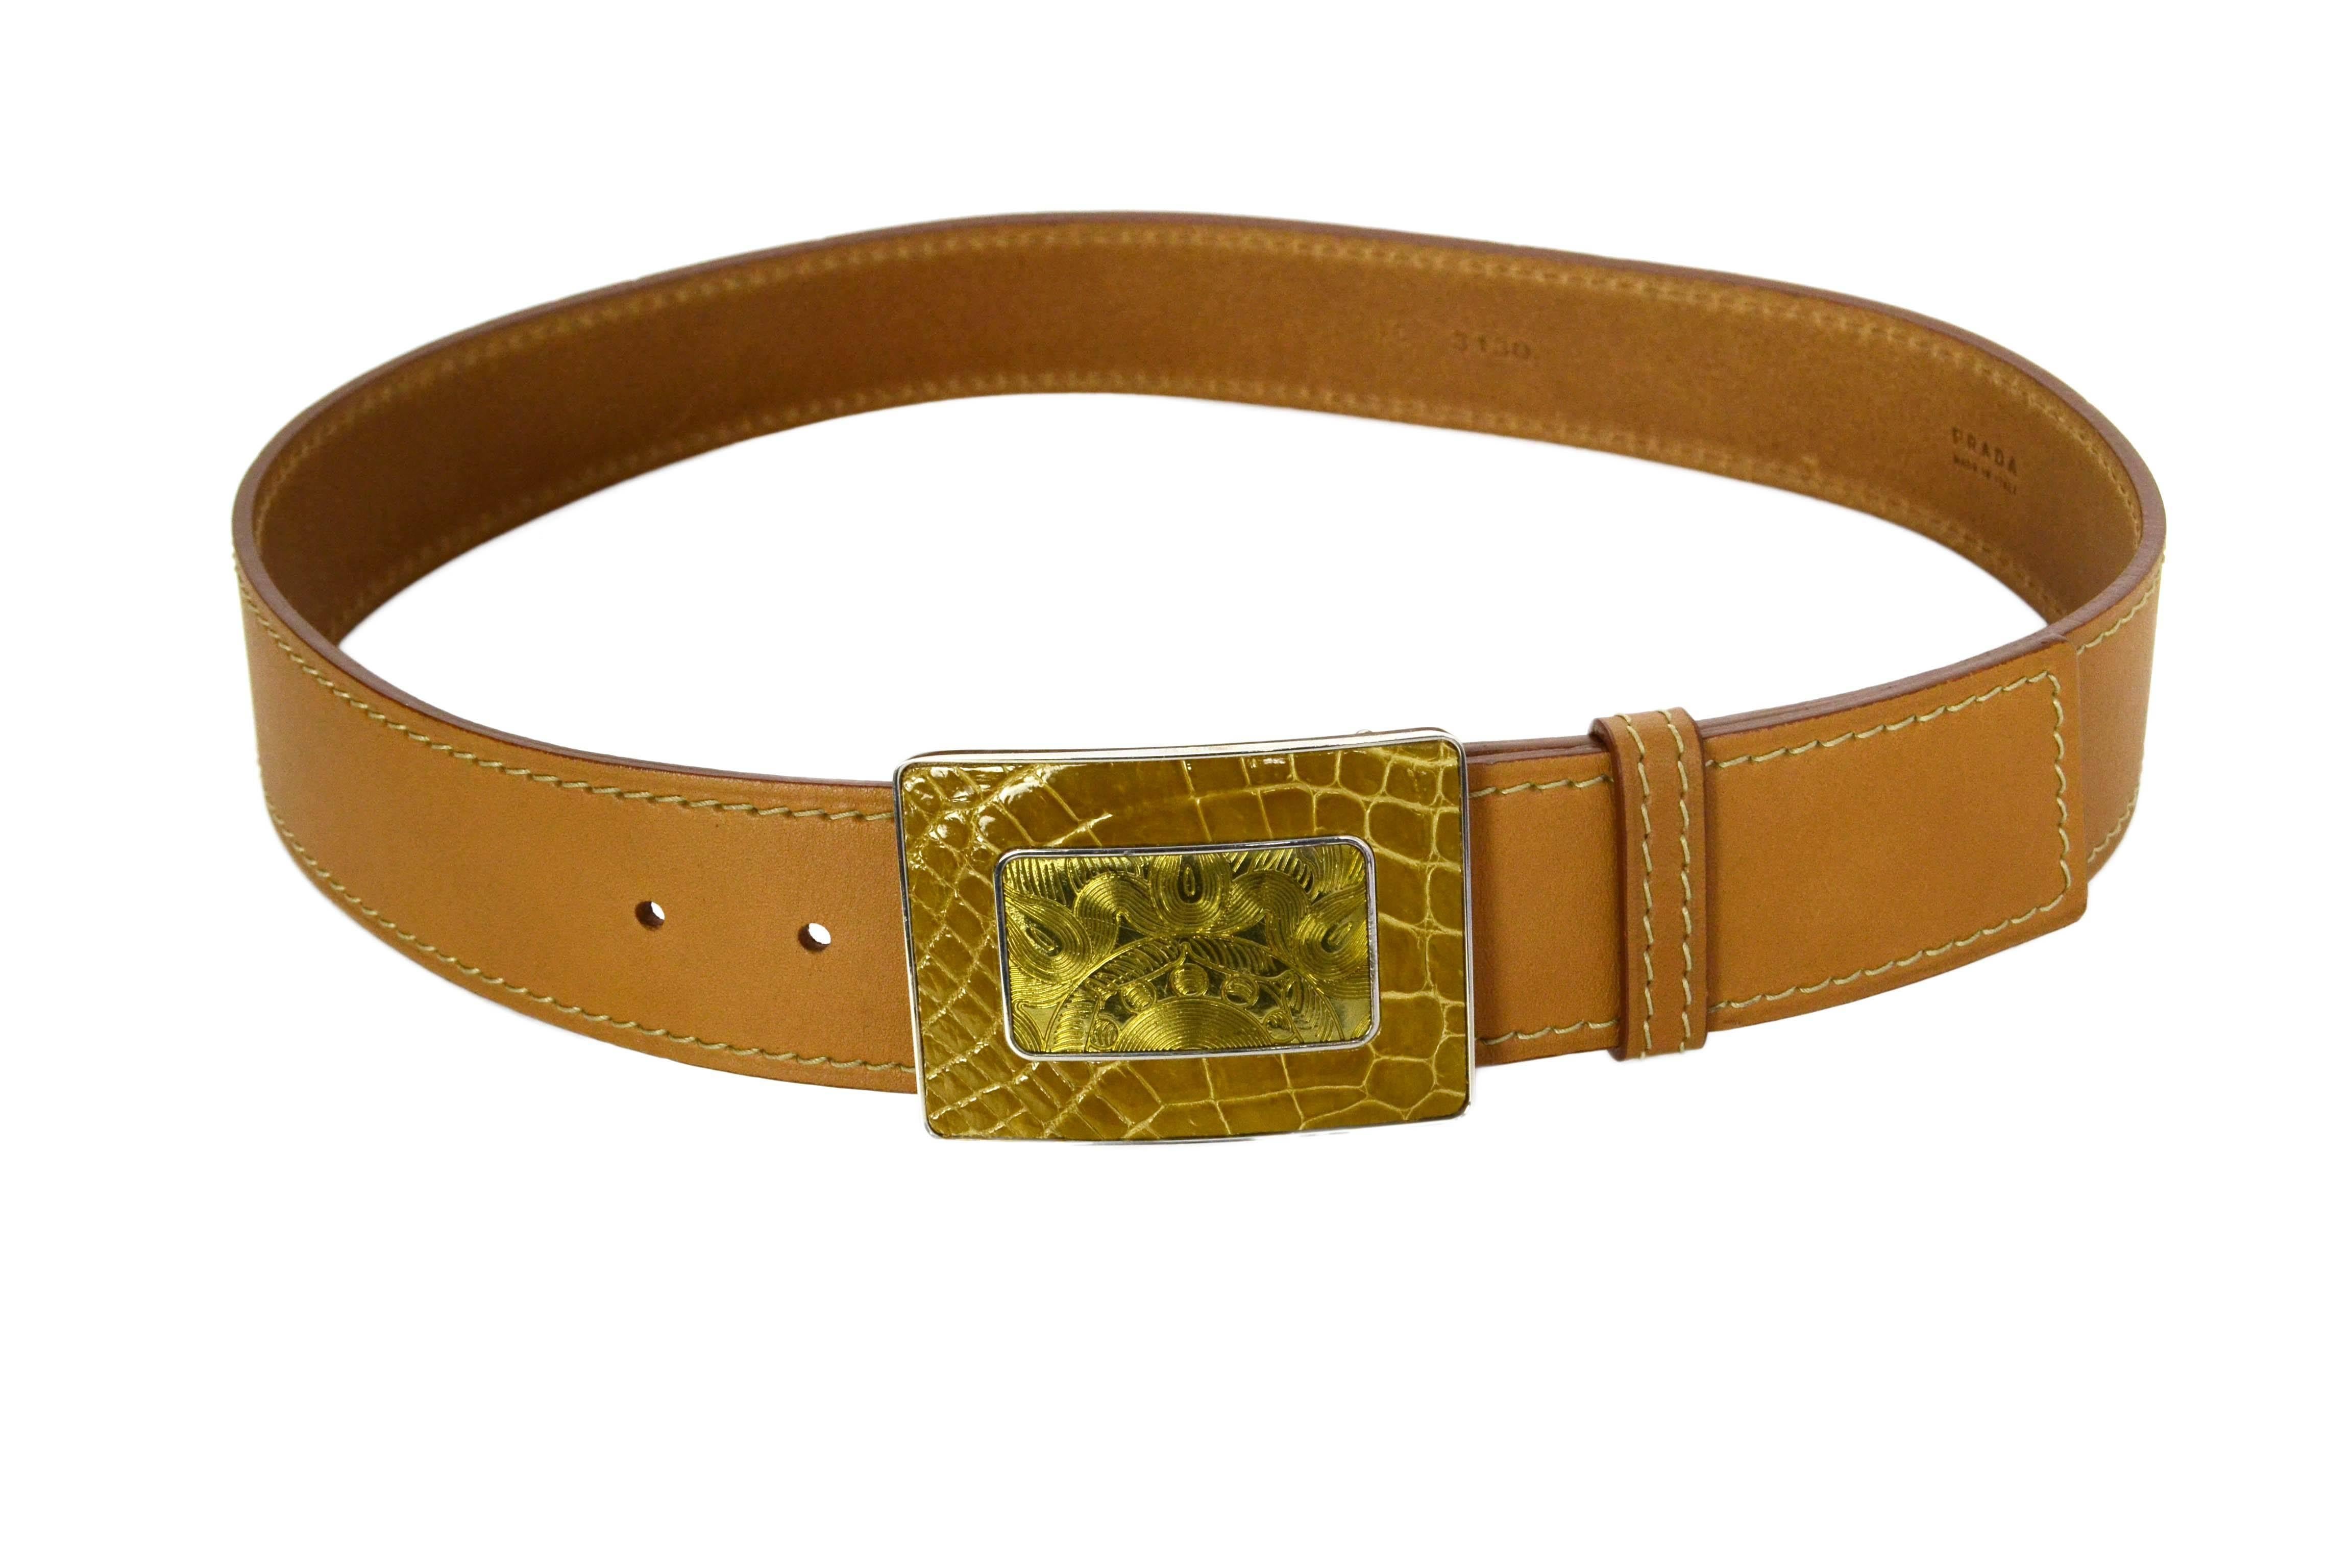 Prada Tan Leather Belt
Features glazed over crocodile belt buckle
Made In: Italy
Color: Tan and silvertone
Materials: Leather, metal and croc
Closure/Opening: Stud and notch closure
Serial Number/Date Code: 1C 3130
Overall Condition: